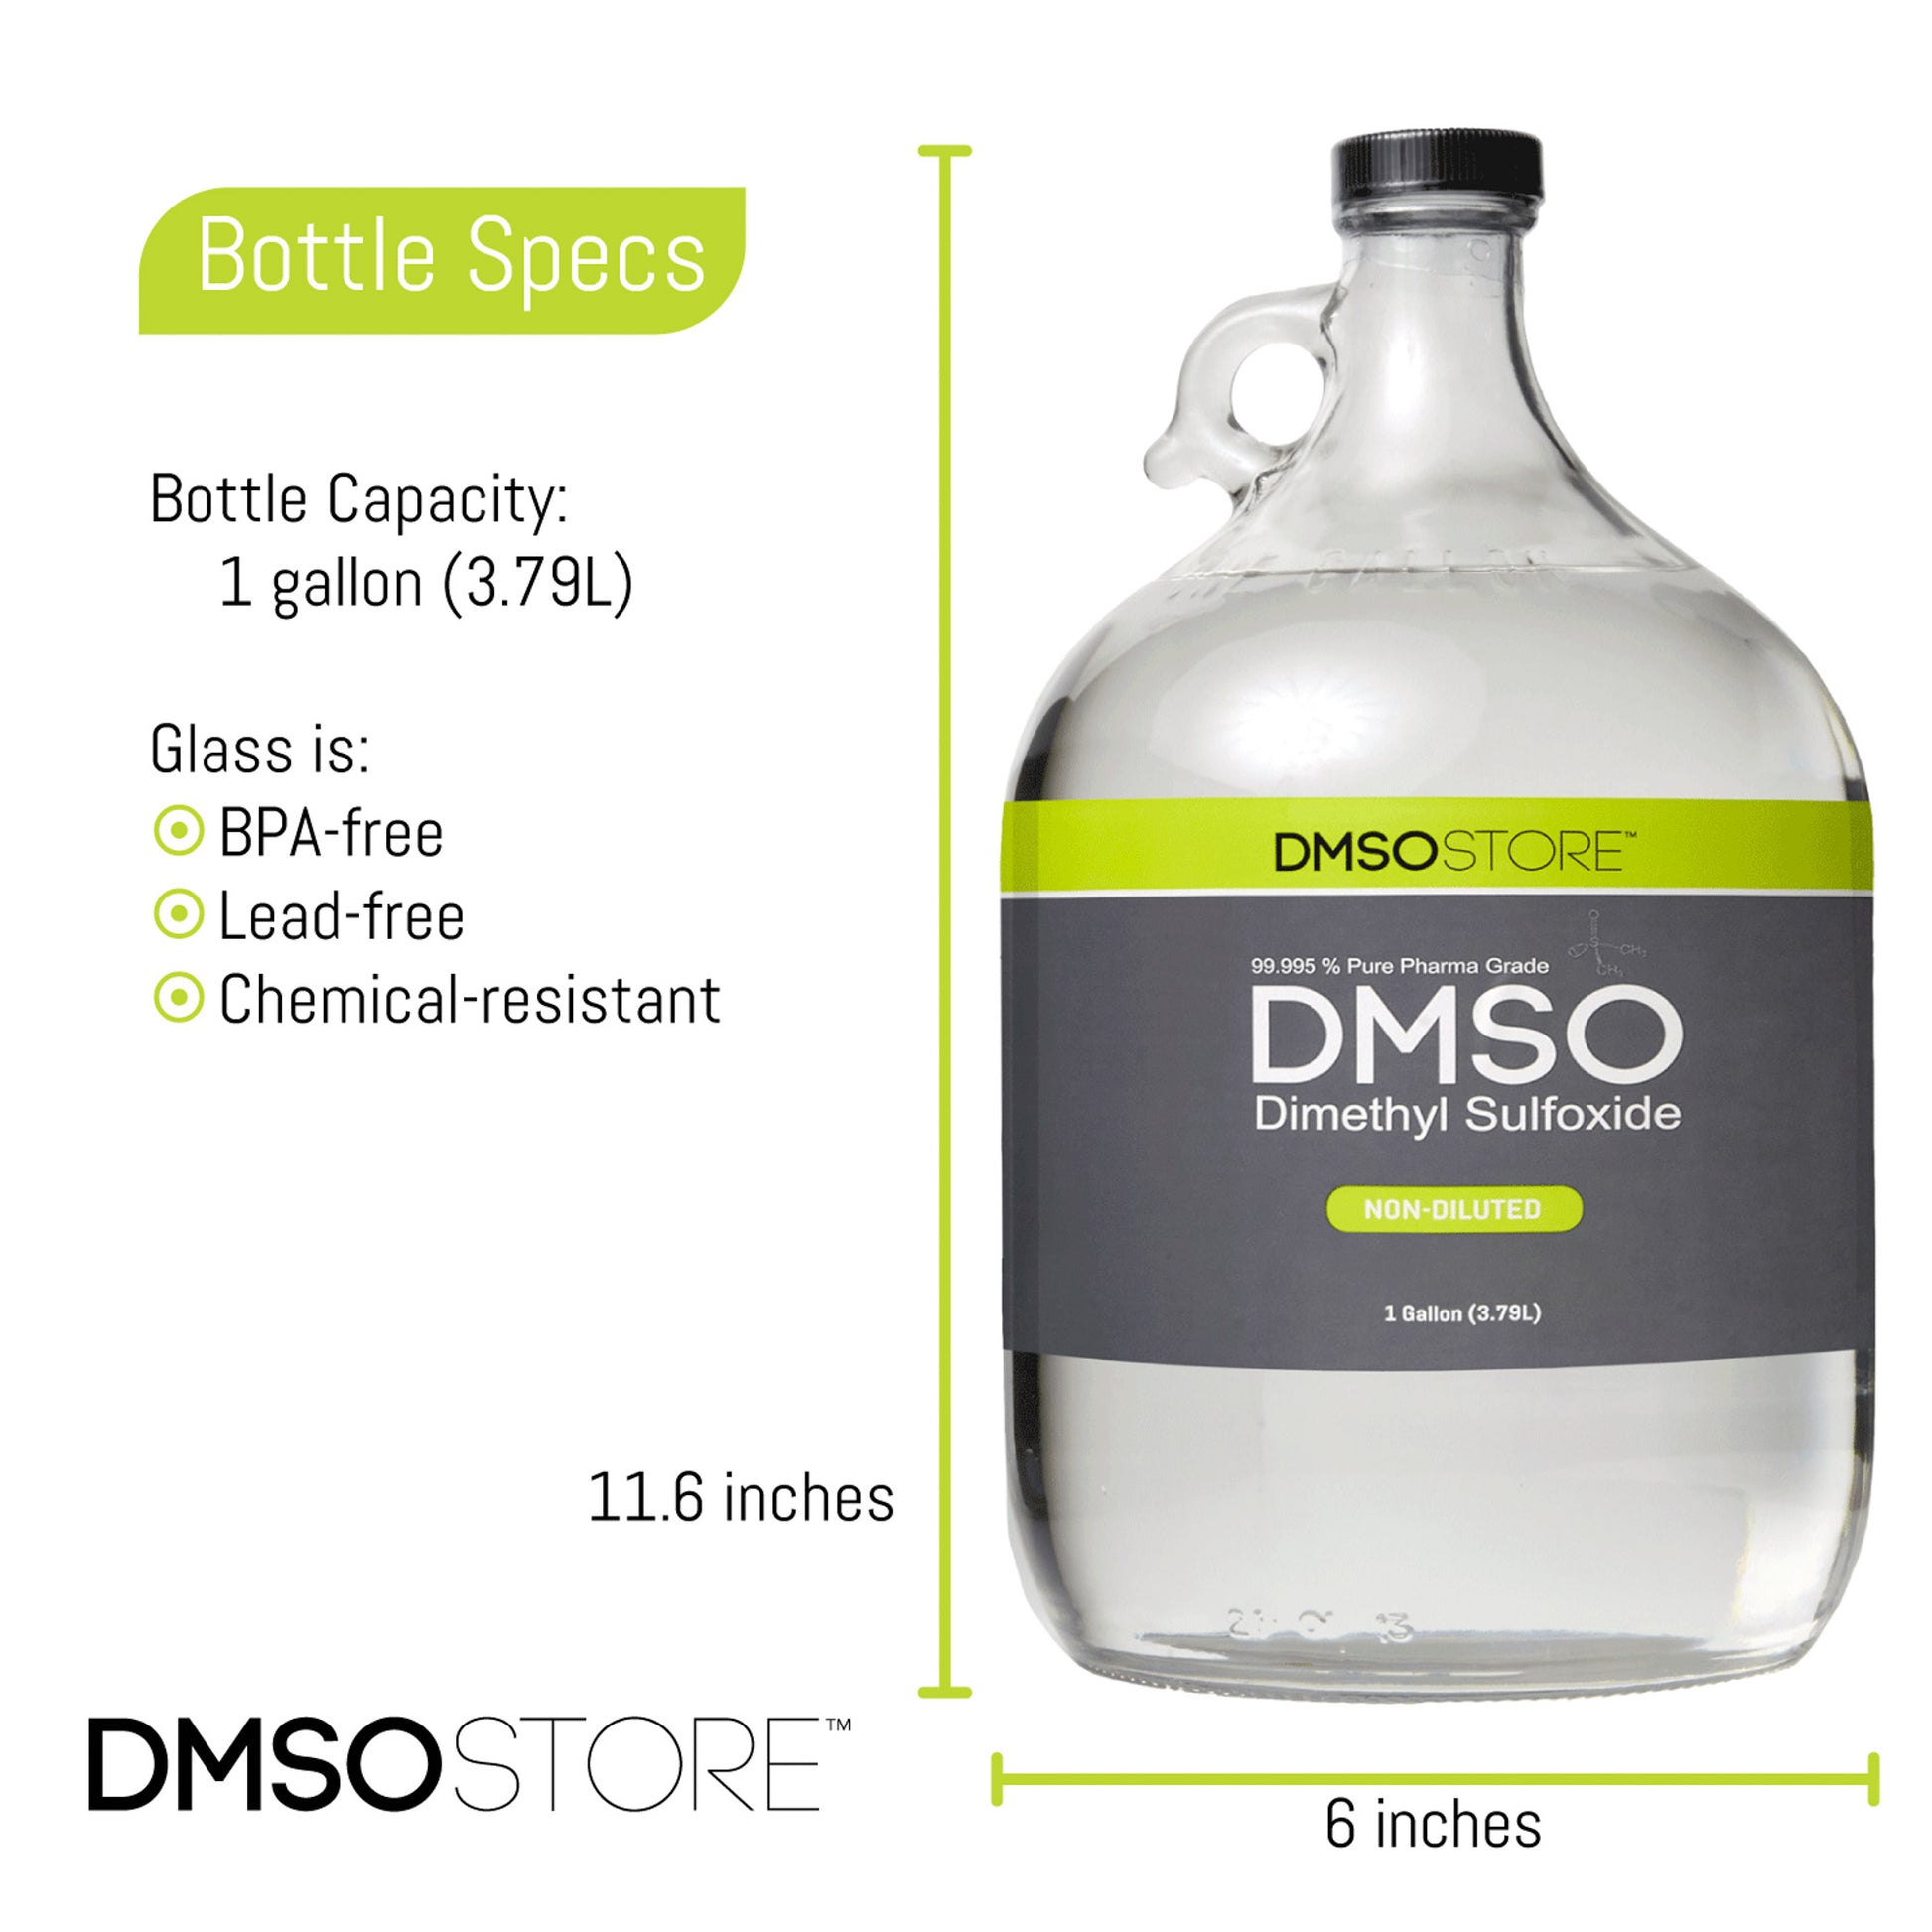 one gallon glass jug with handle. Black twist on cap attached to jug. Label reads 99.995% Pure pharma Grade DMSO (Dimethyl Sulfoxide) 1 Gallon. Specs